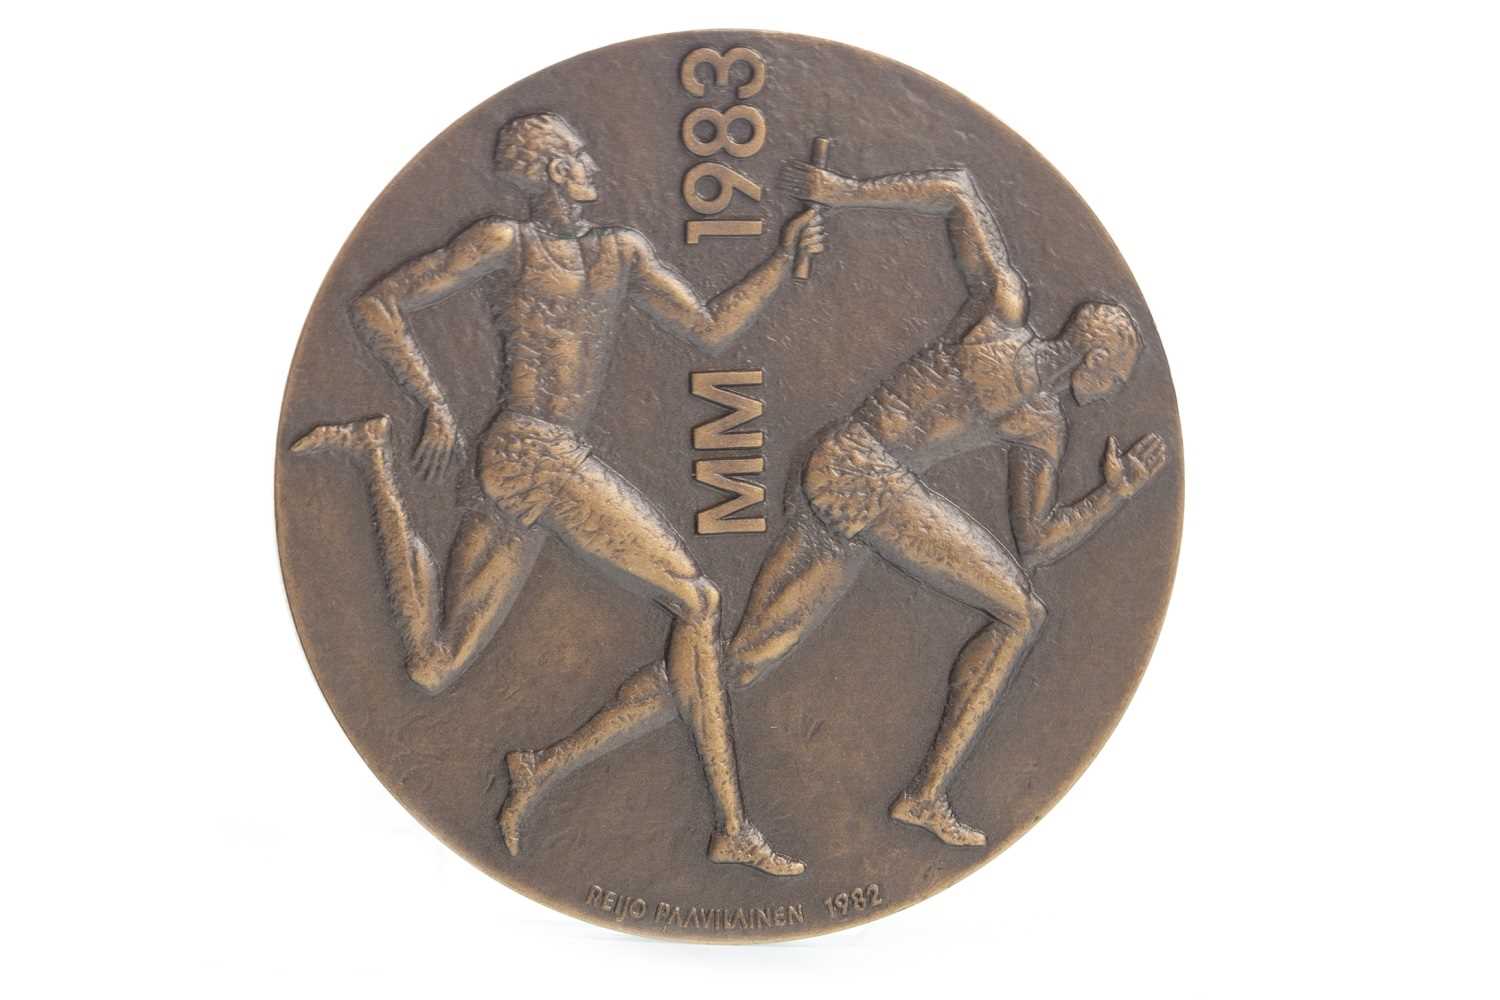 Lot 1910 - A BRONZE MEDAL FROM THE FIRST WORLD ATHLETICS CHAMPIONSHIPS 1983